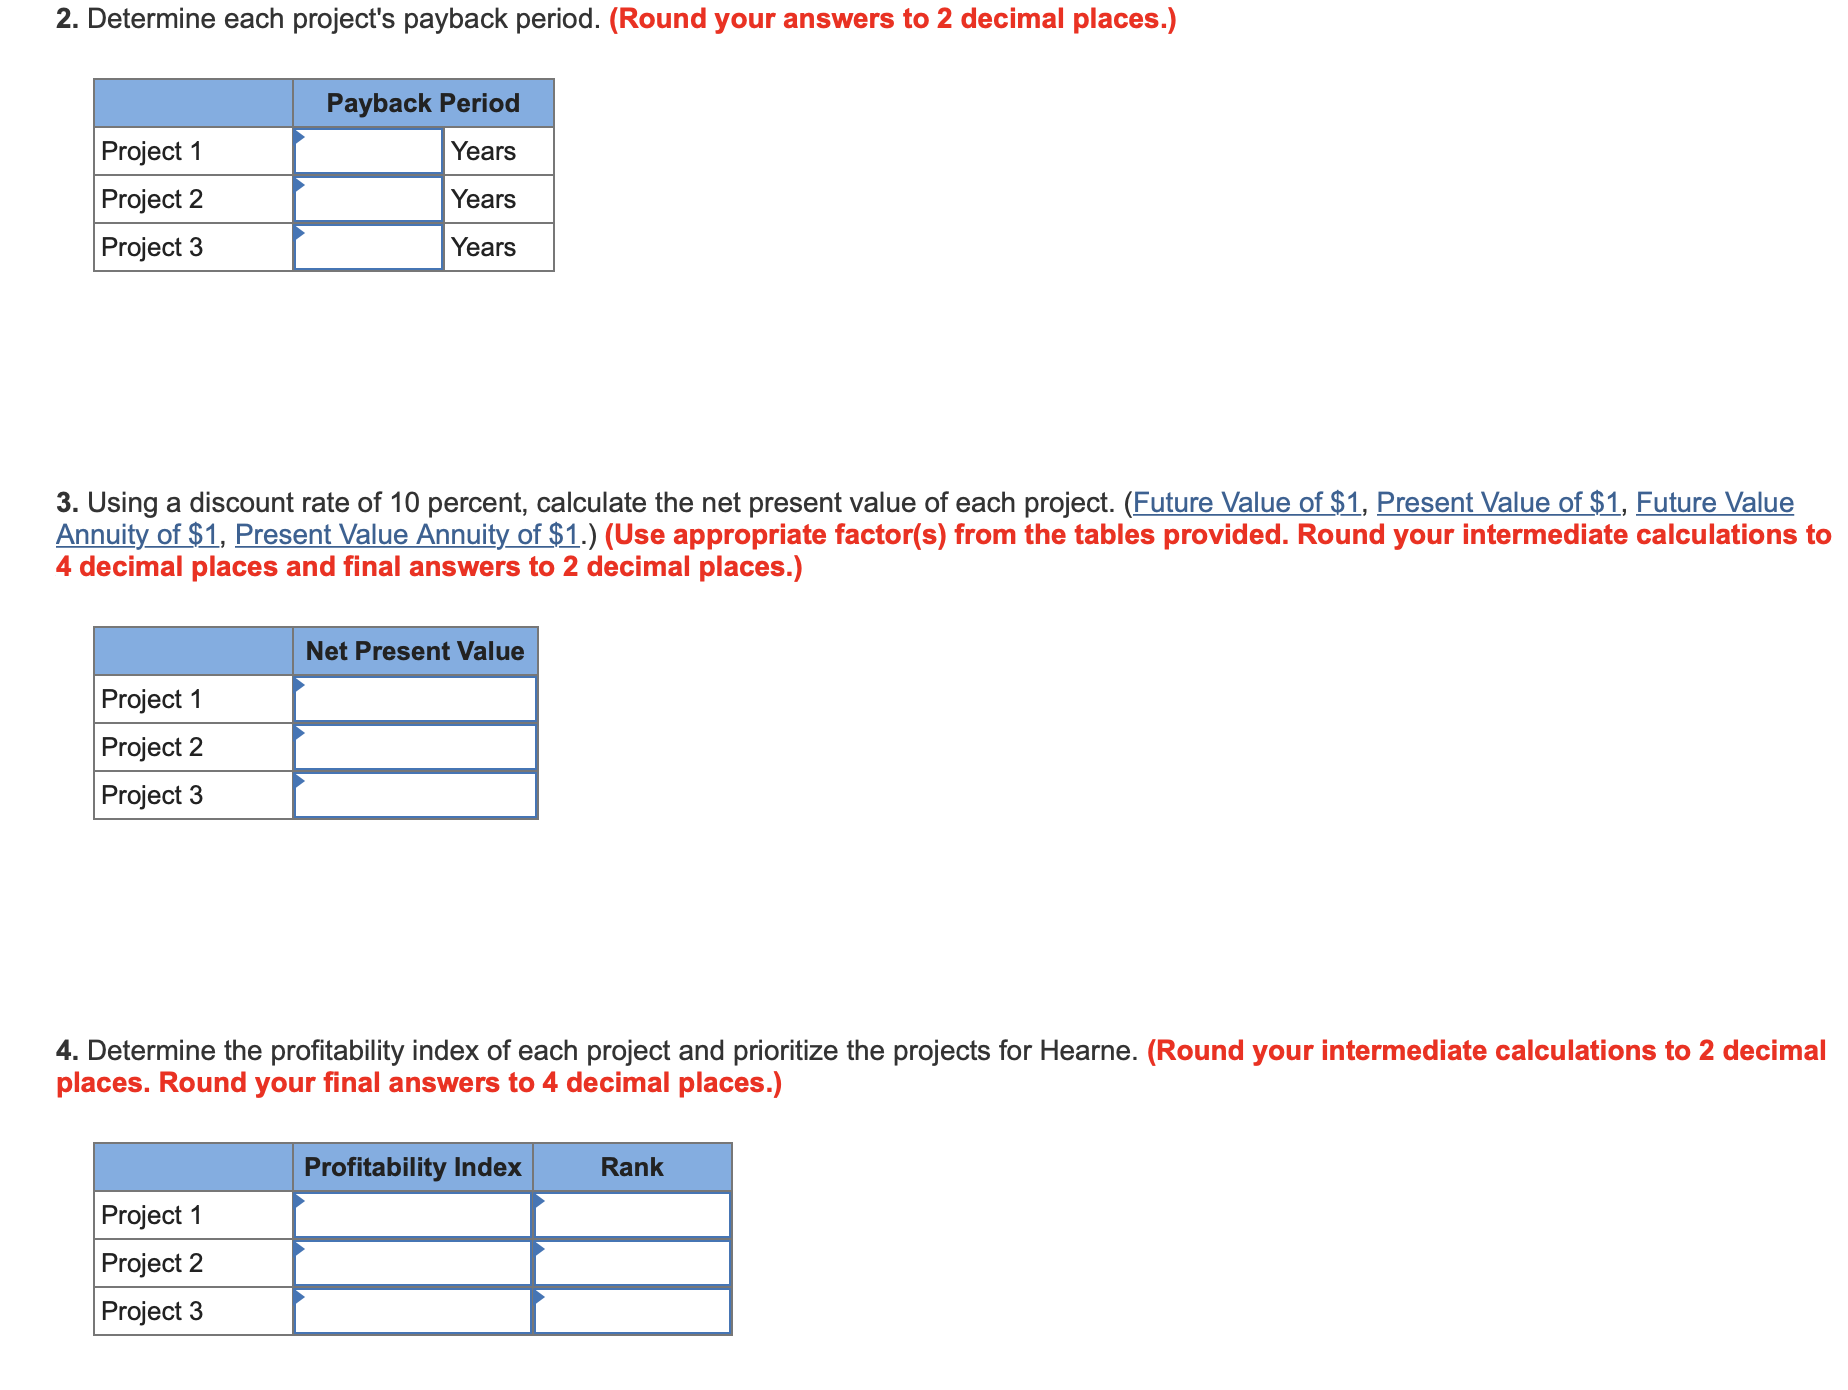 2. Determine each project's payback period. (Round your answers to 2 decimal places.)
Payback Period
Project 1
Years
Project 2
Years
Project 3
Years
3. Using a discount rate of 10 percent, calculate the net present value of each project. (Future Value of $1, Present Value of $1, Future Value
Annuity of $1, Present Value Annuity of $1.) (Use appropriate factor(s) from the tables provided. Round your intermediate calculations to
4 decimal places and final answers to 2 decimal places.)
Net Present Value
Project 1
Project 2
Project 3
4. Determine the profitability index of each project and prioritize the projects for Hearne. (Round your intermediate calculations to 2 decimal
places. Round your final answers to 4 decimal places.)
Rank
Profitability Index
Project 1
Project 2
Project 3
